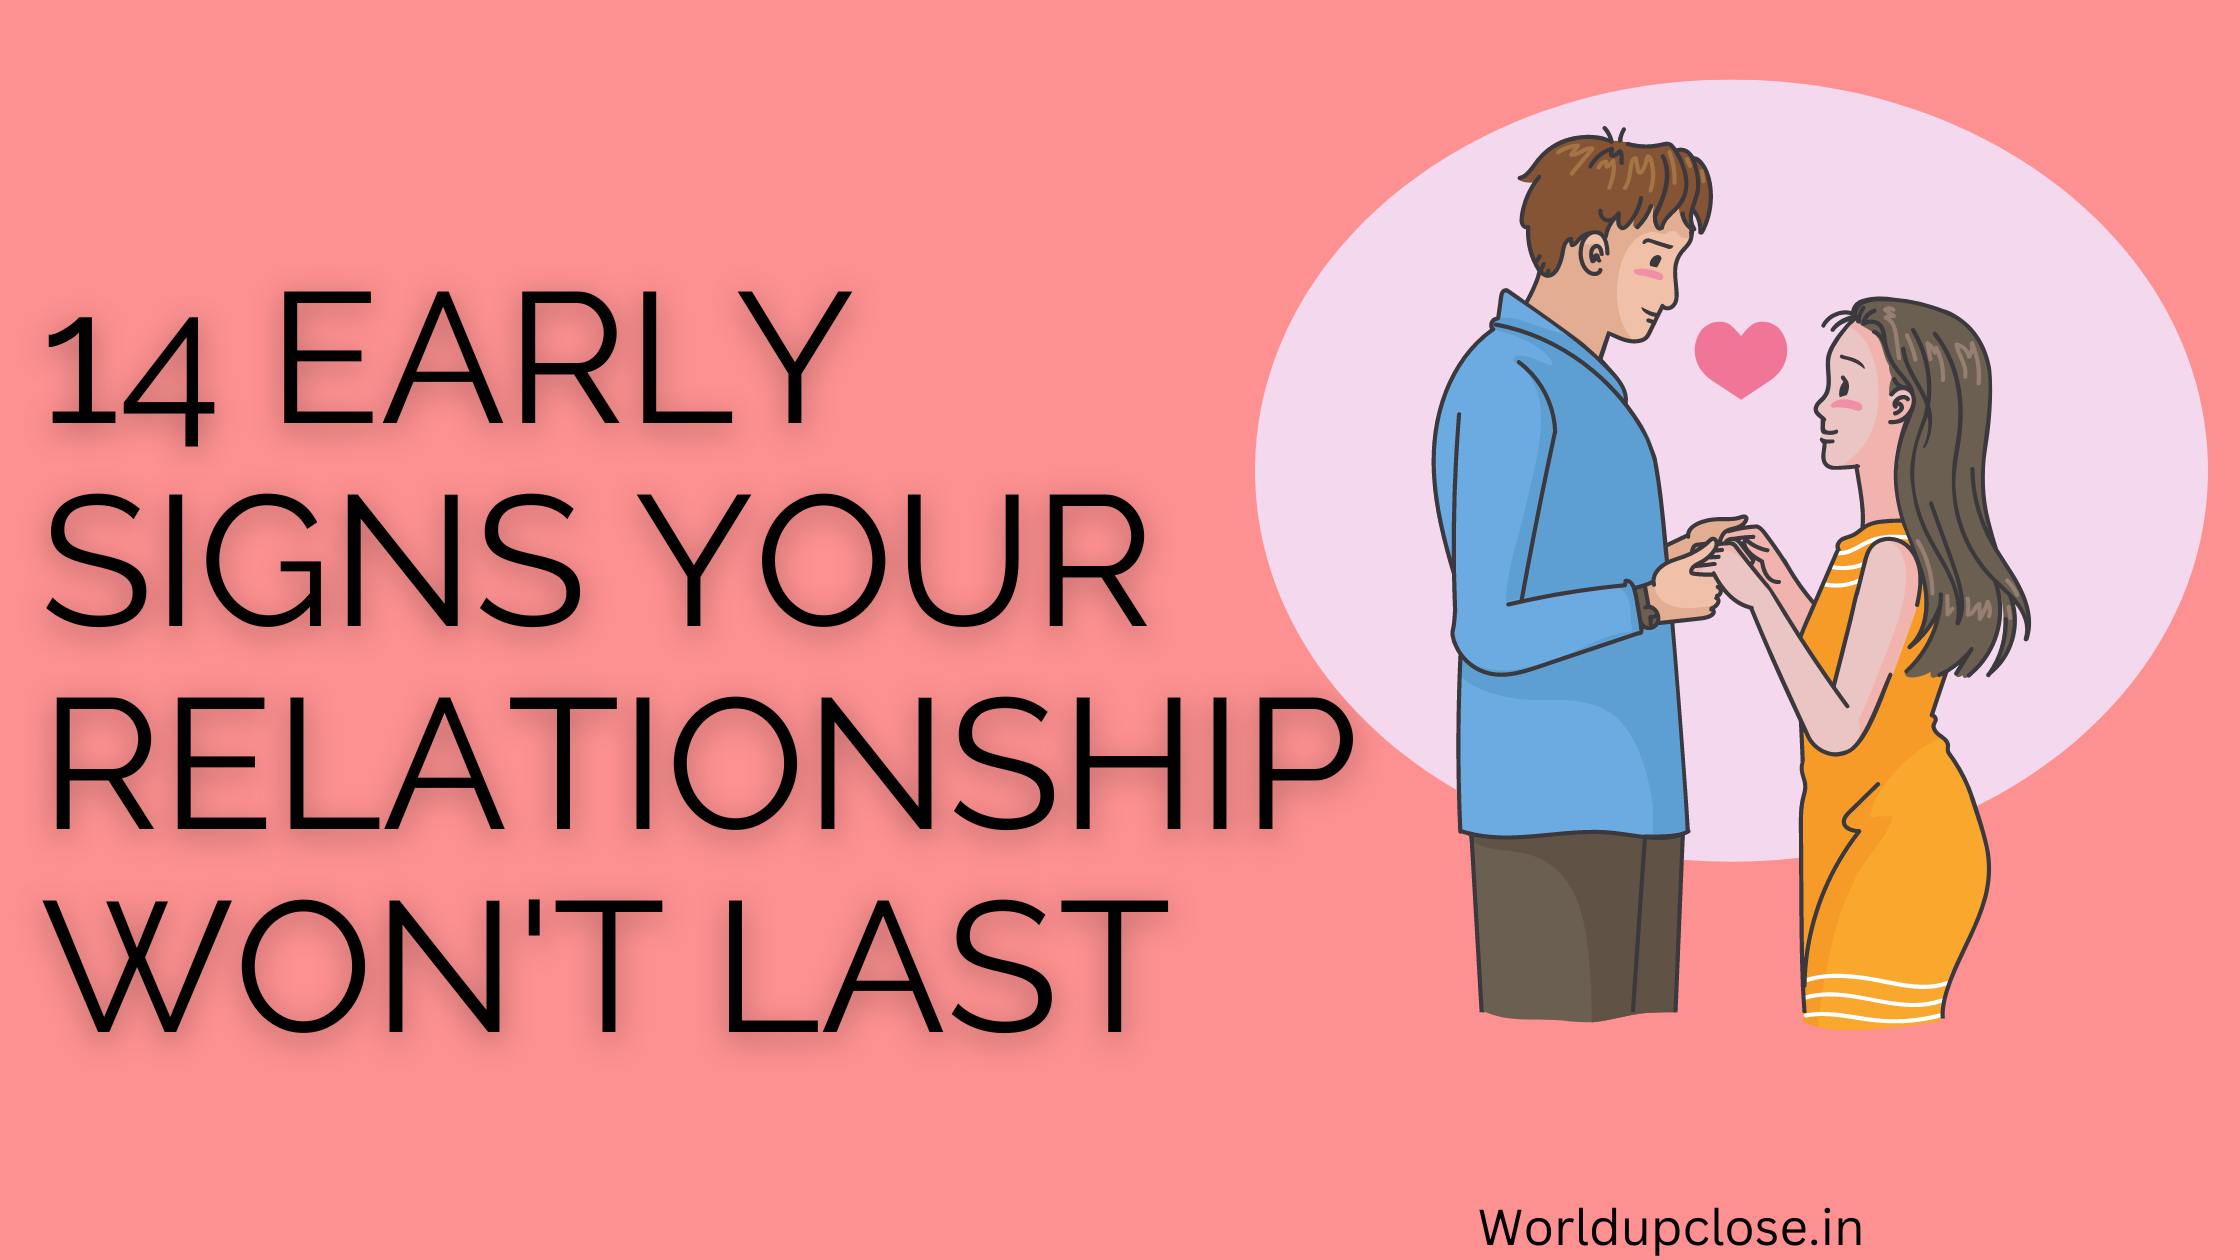 14 Early Signs Your Relationship Won't Last 57